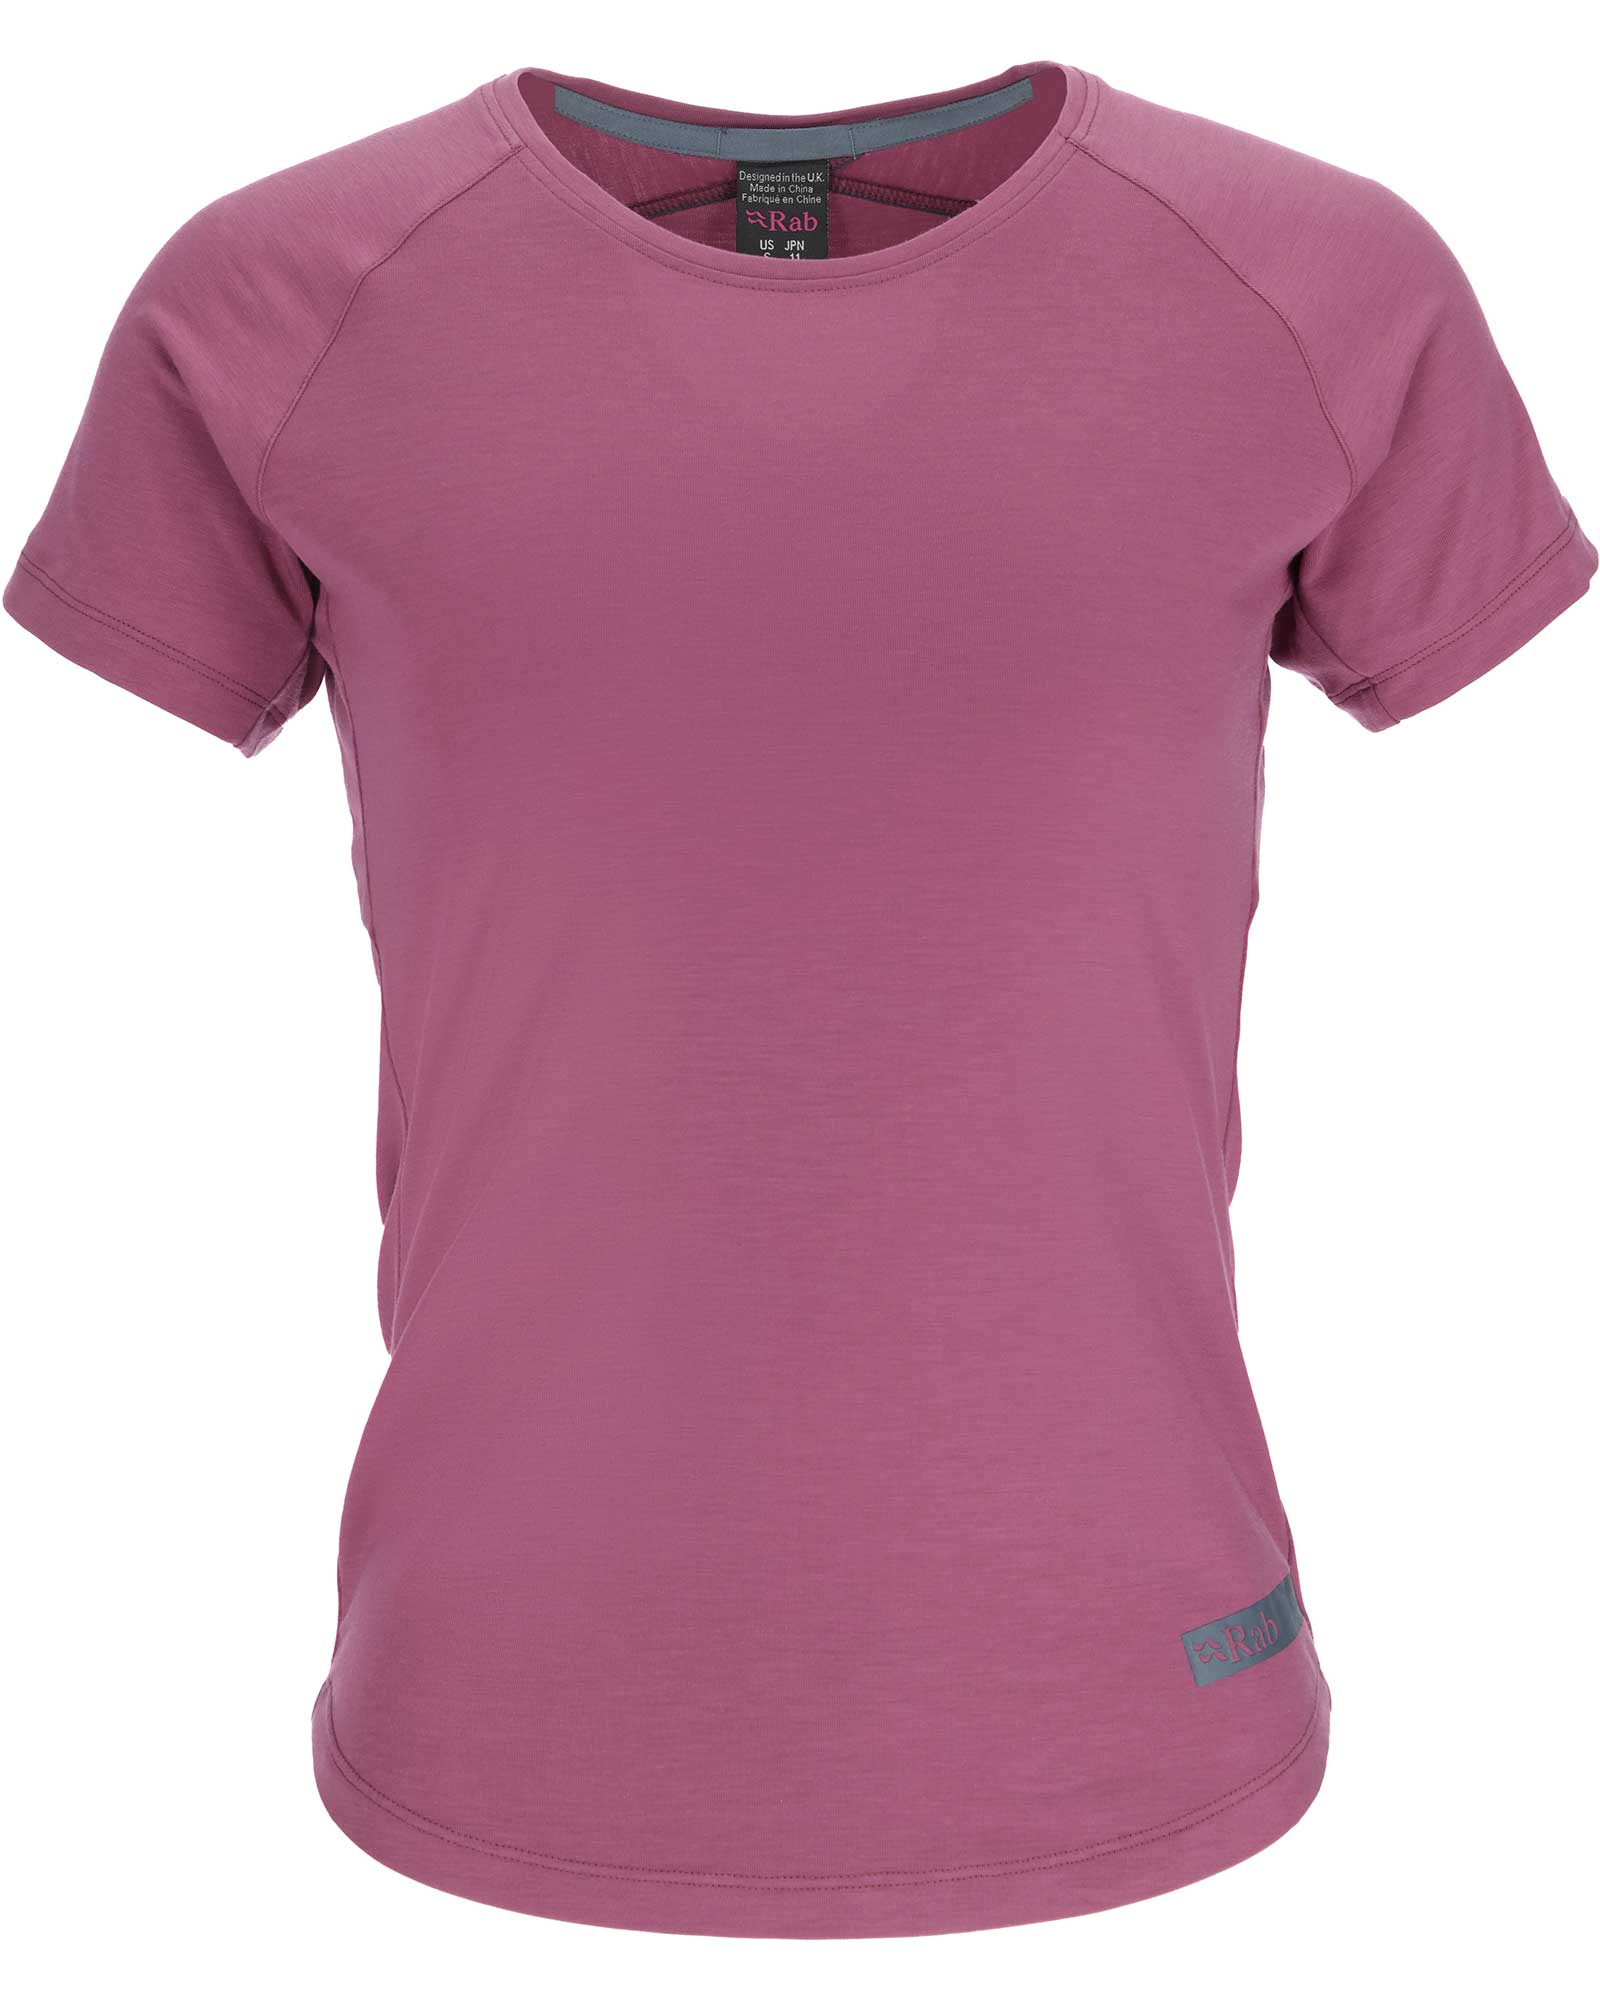 Rab Lateral Women’s T Shirt - Heather 8